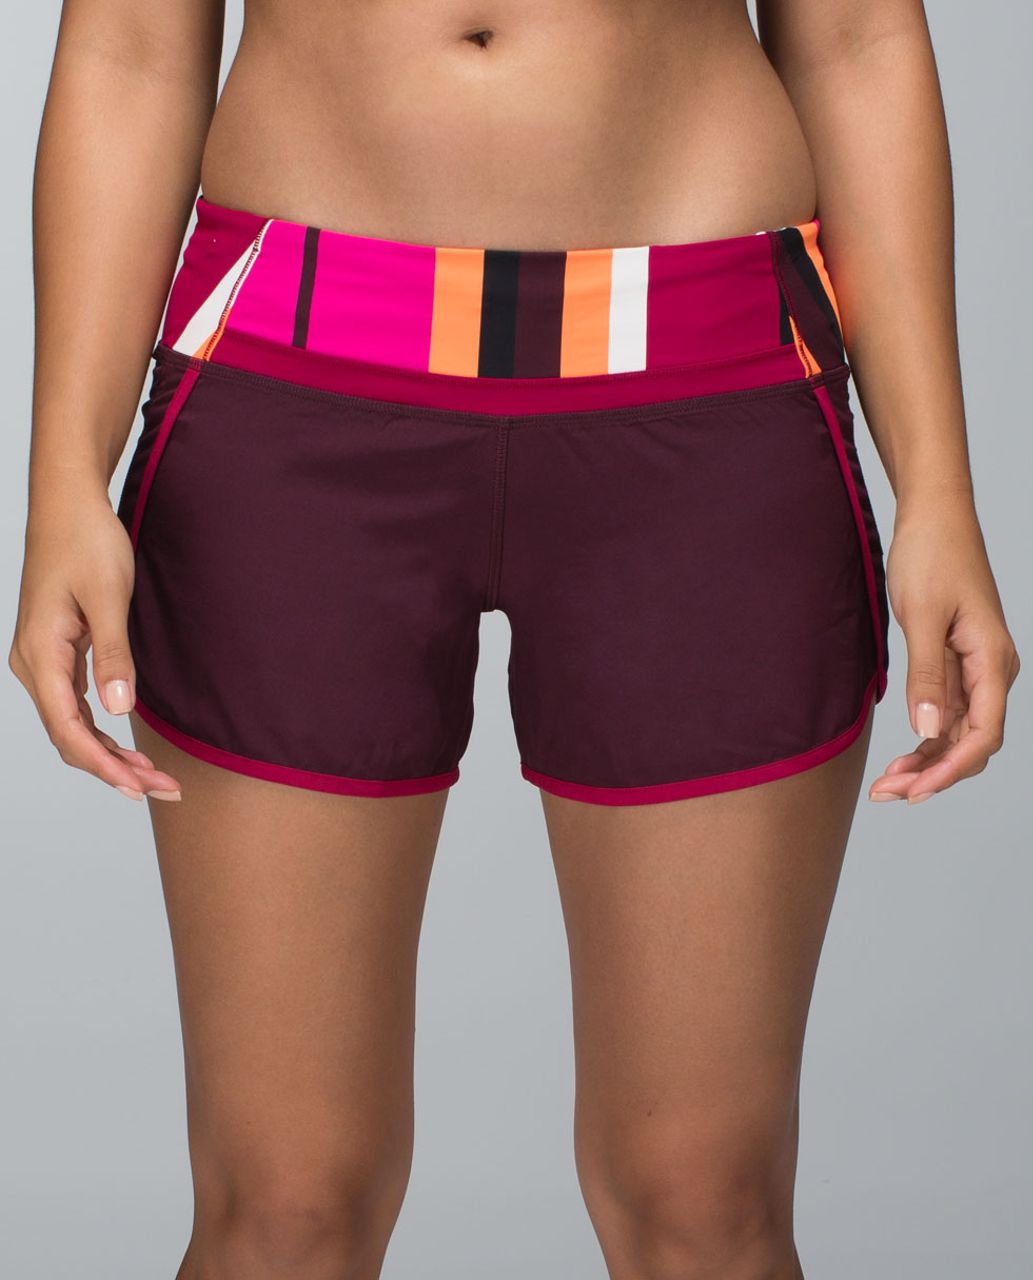 Lululemon Run Times Short *4-way Stretch - Bordeaux Drama / Bumble Berry / Blossom Stripe Bumble Berry Ghost